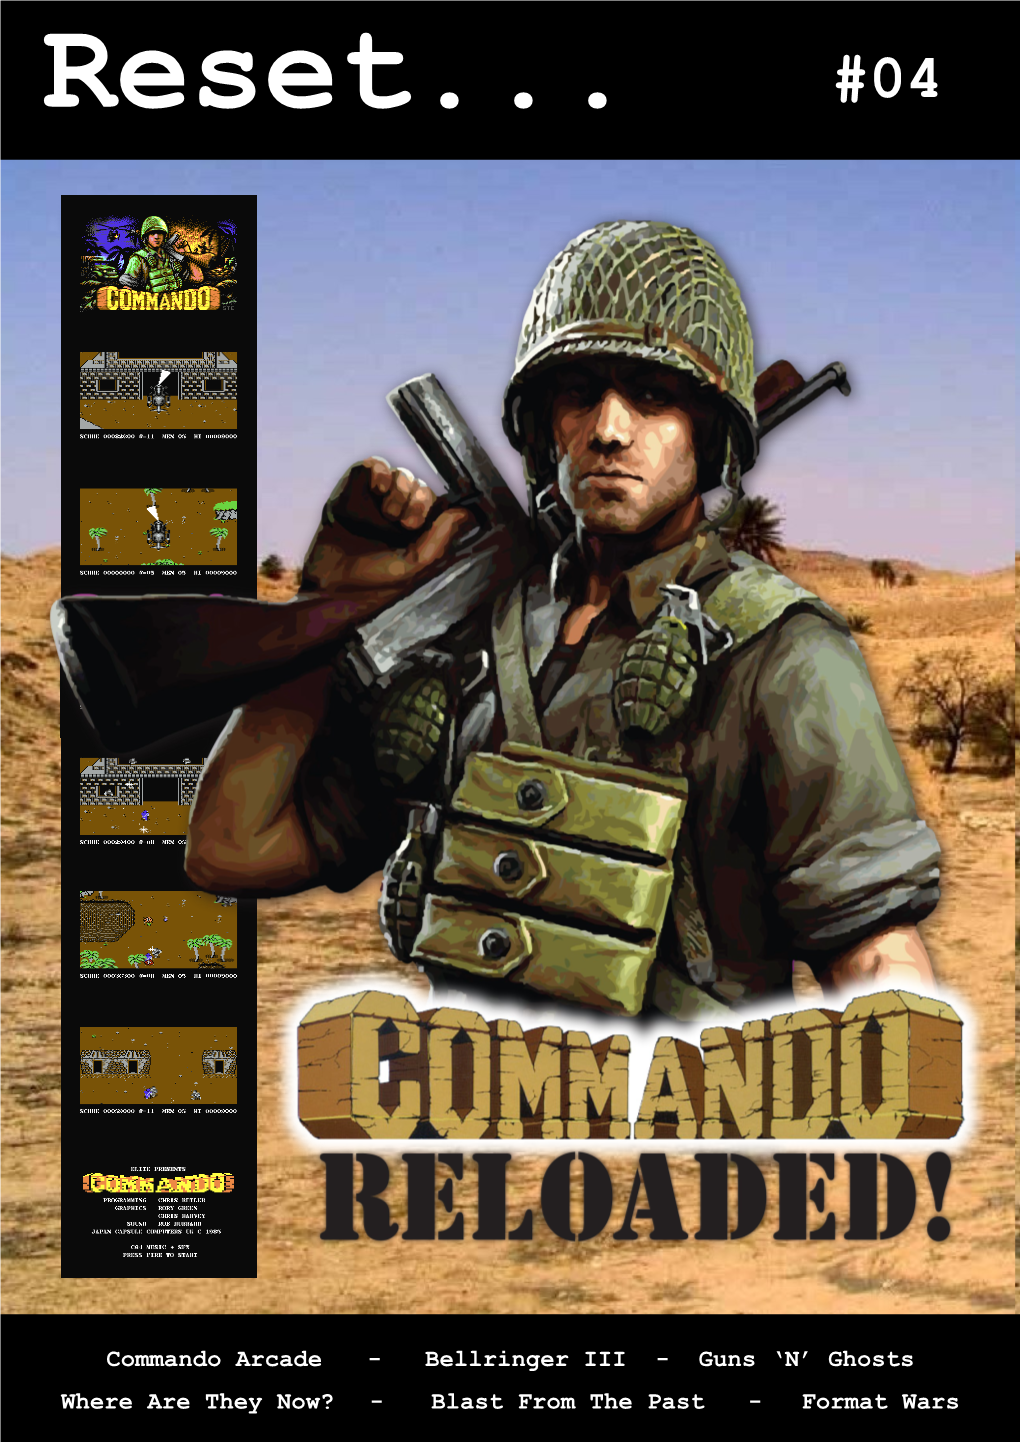 Commando Arcade - Bellringer III - Guns ‘N’ Ghosts Where Are They Now? - Blast from the Past - Format Wars